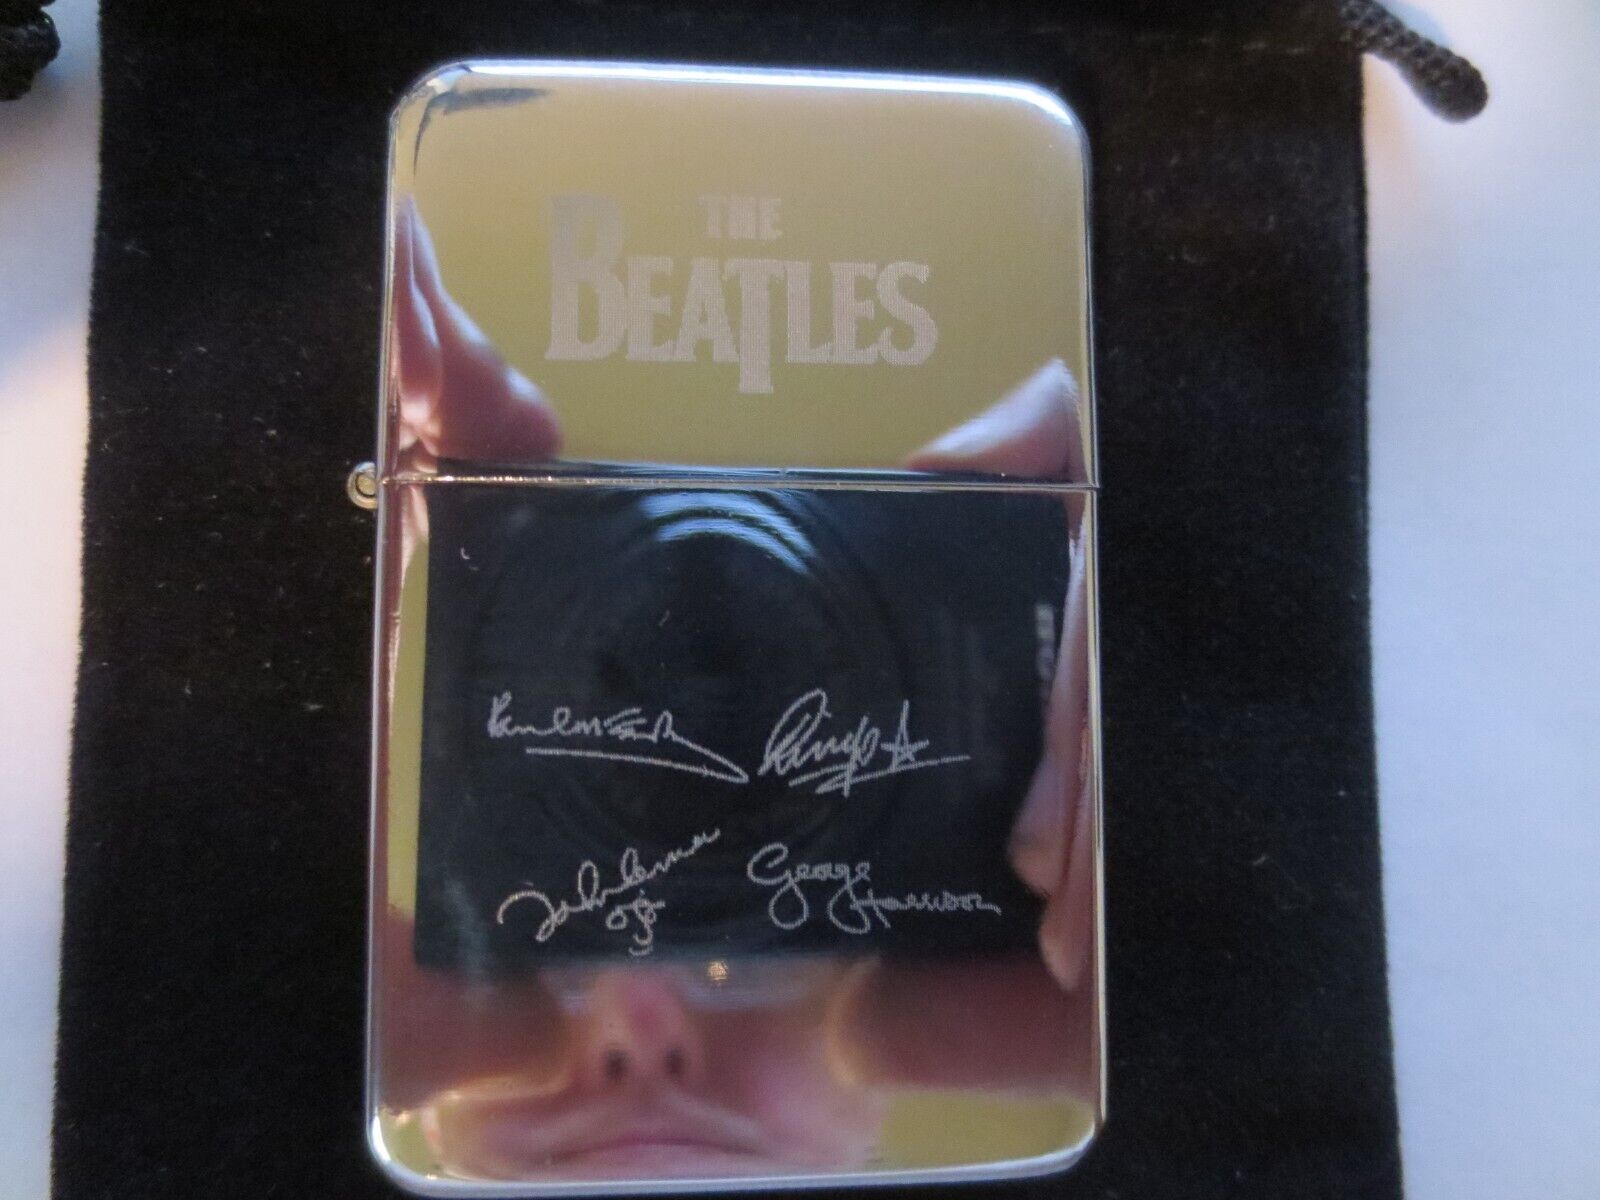 The Beatles Engraved Windproof Lighter.